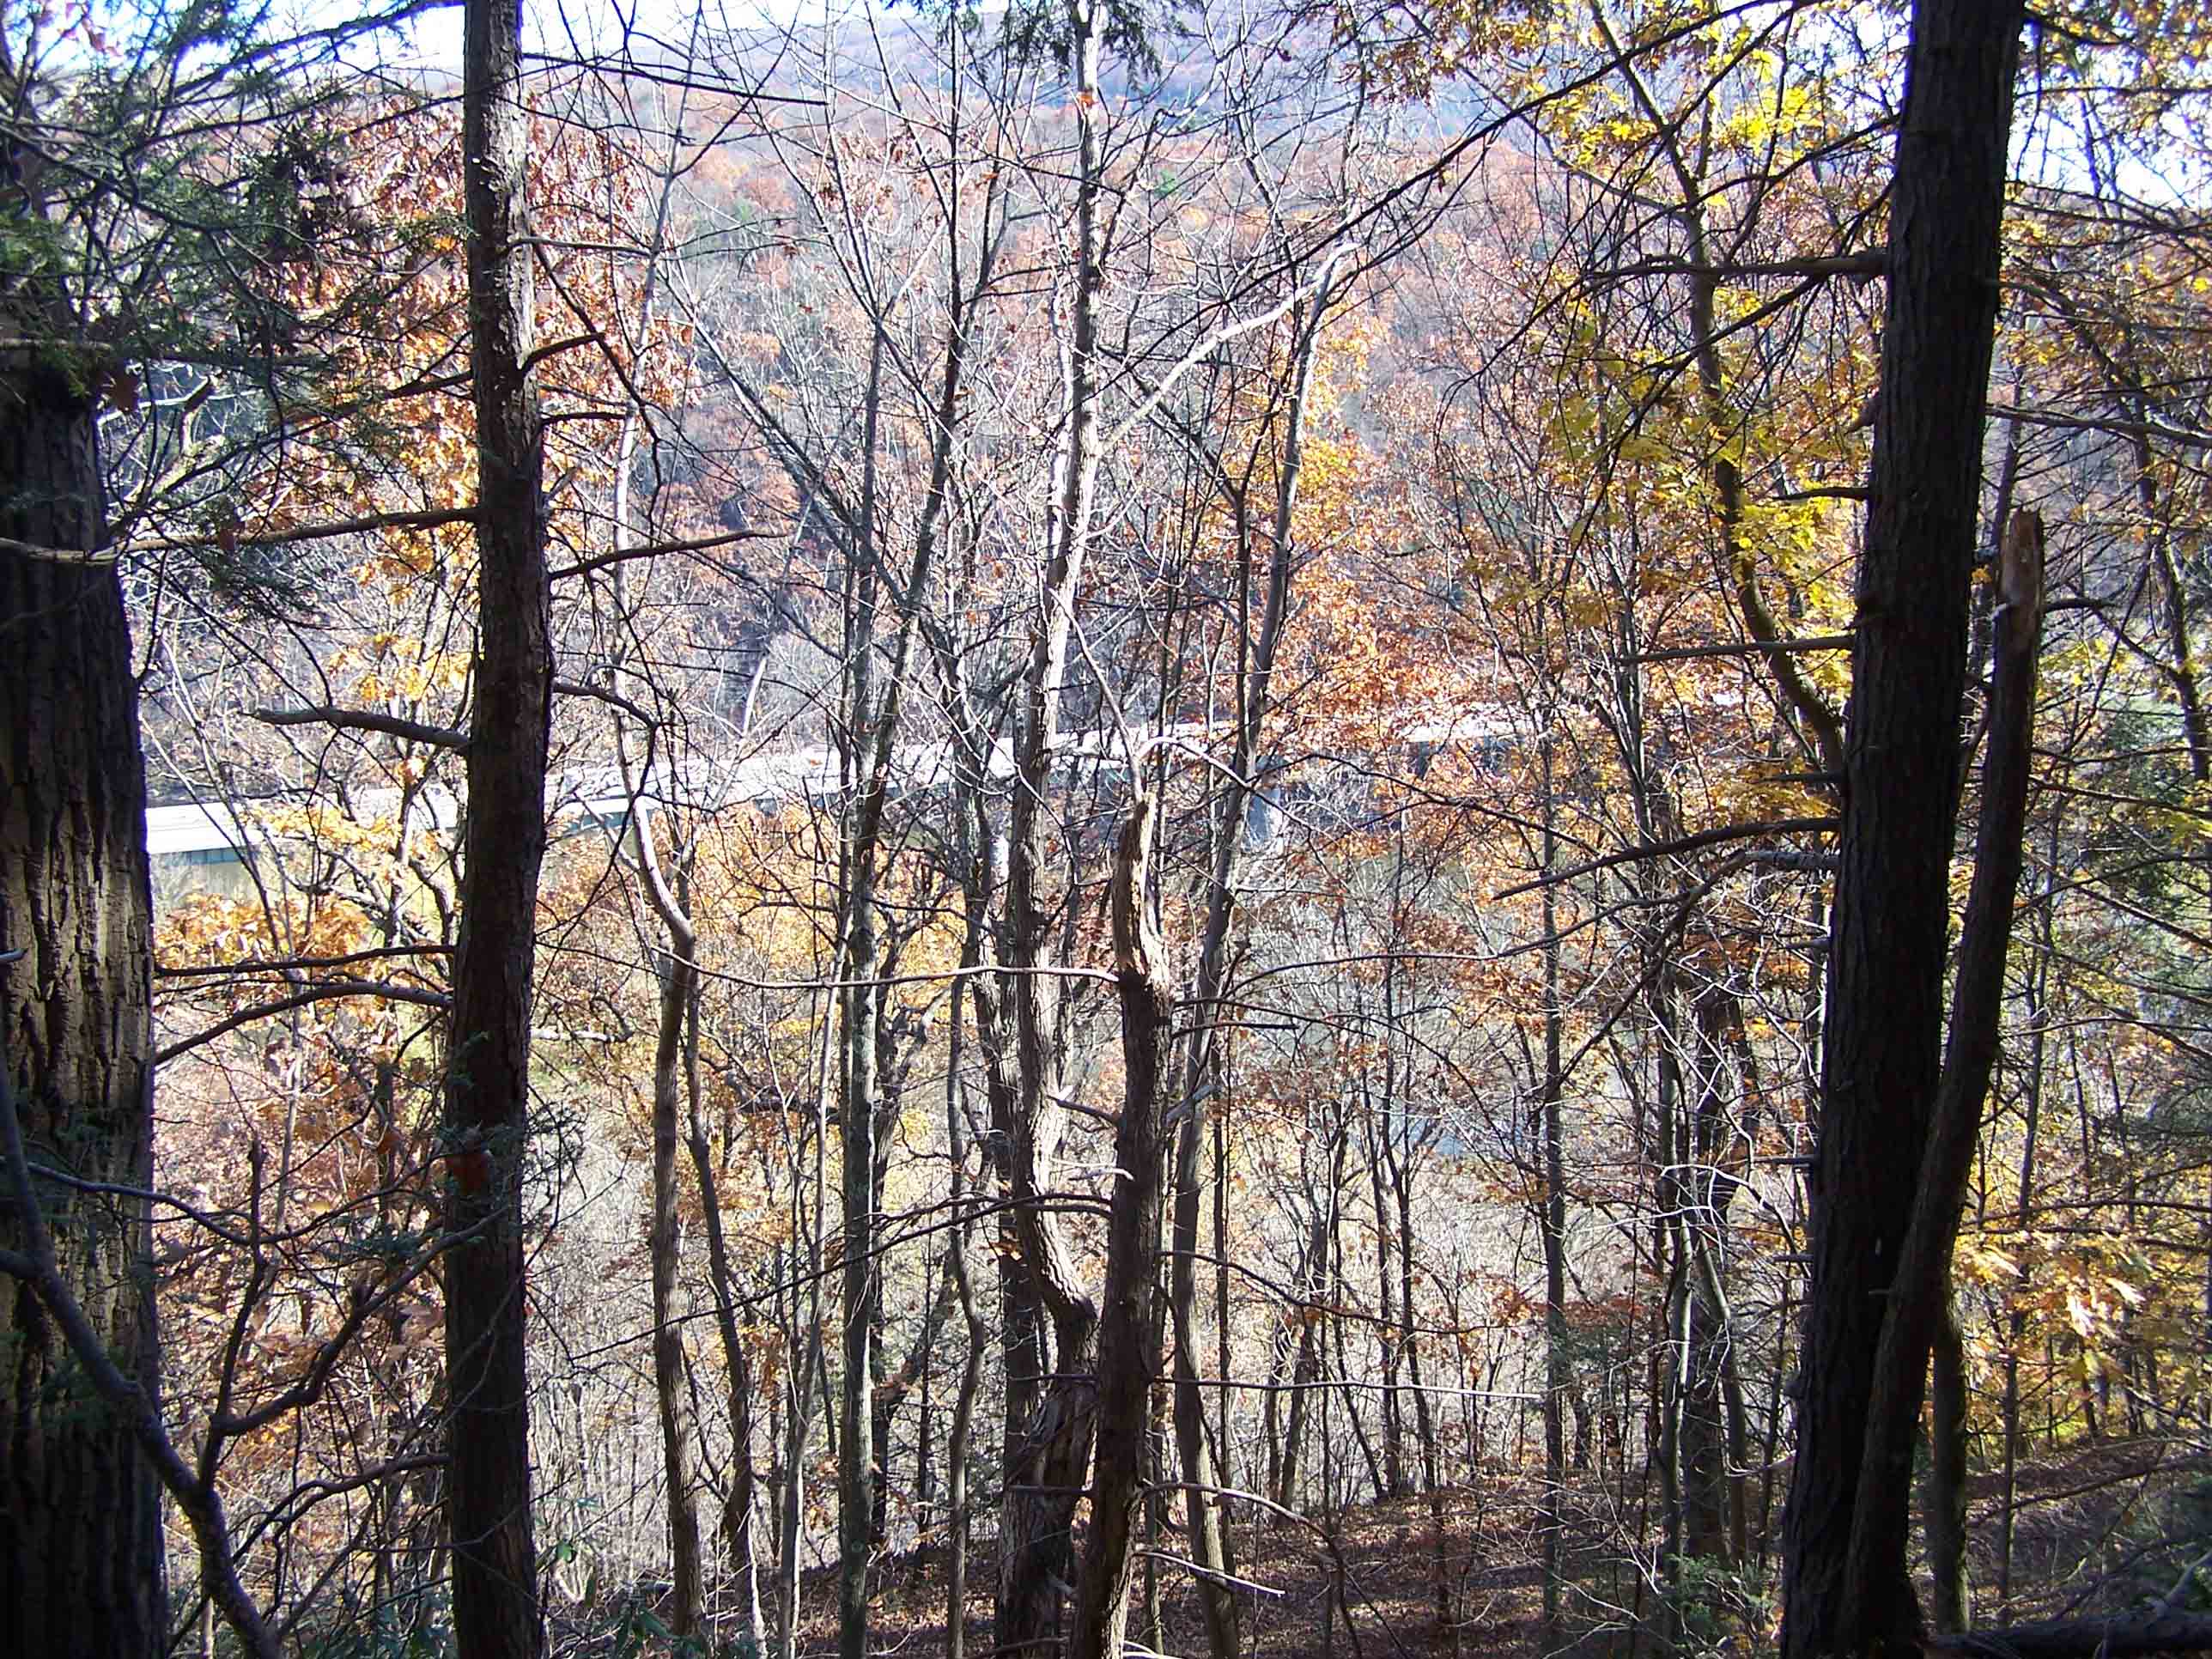 mm 0.8 - View of AT trail over the Delaware River. Courtesy at@rohland.org